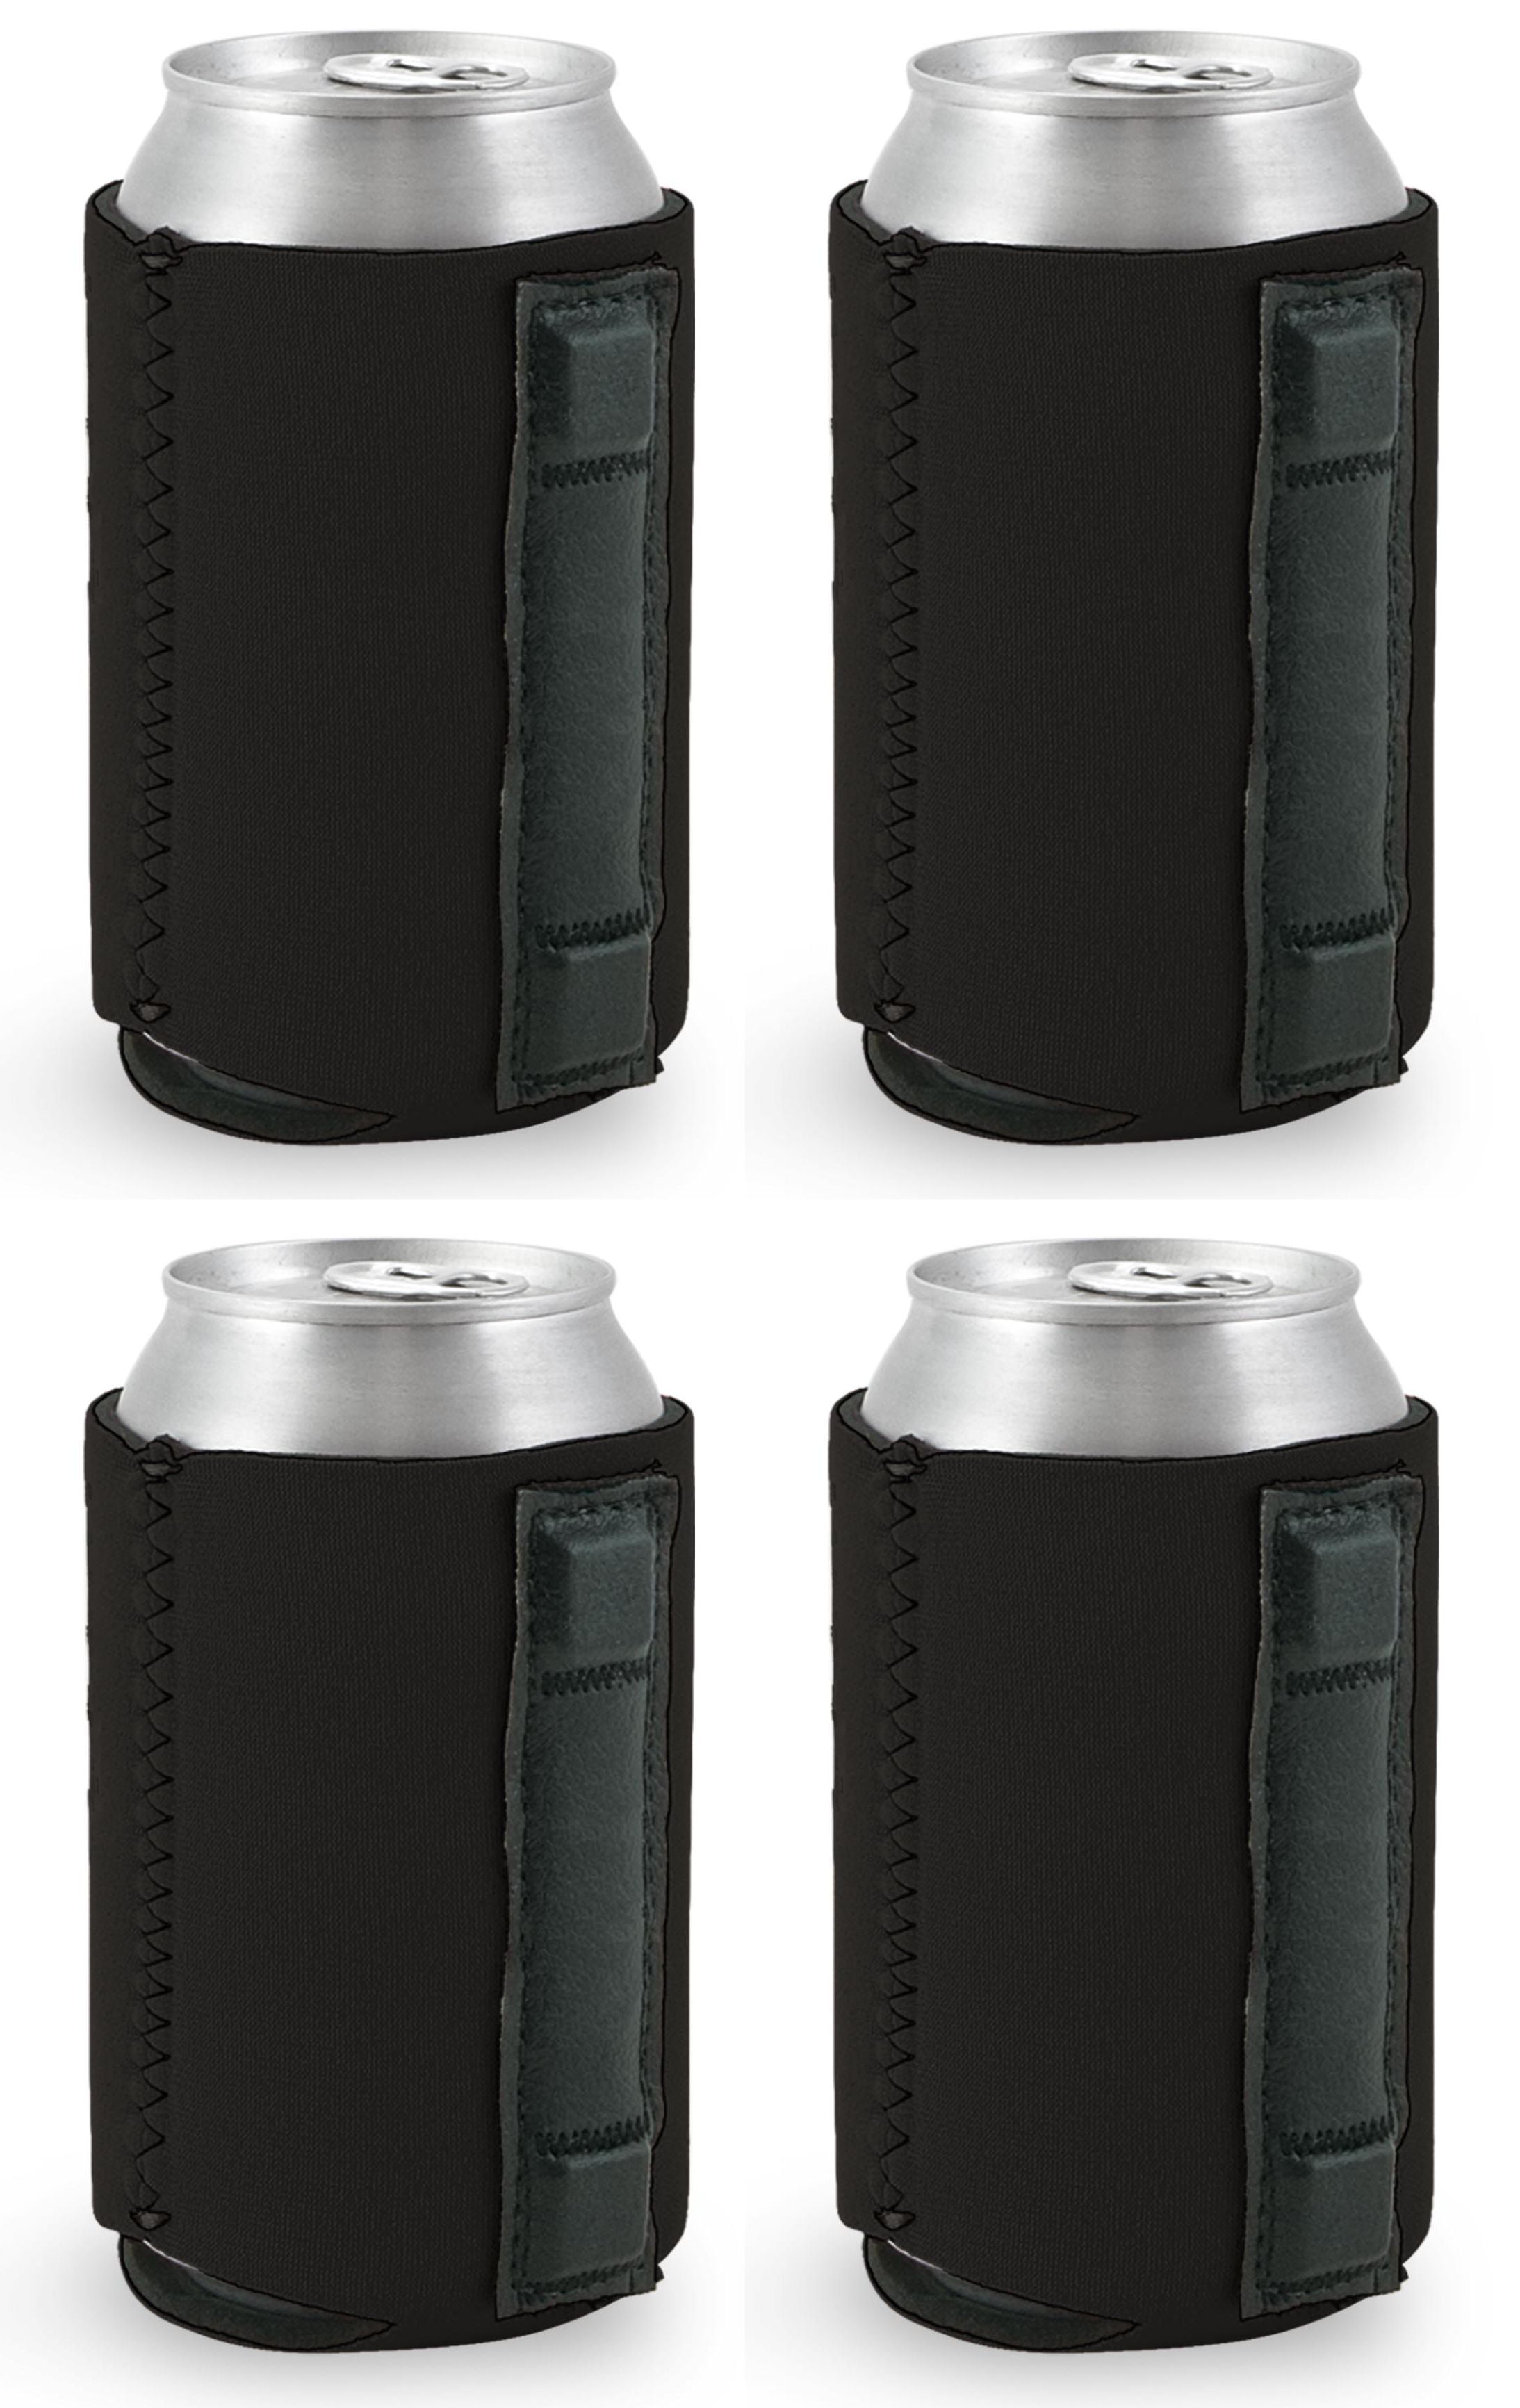 Details about   FUNNY CAN/BOTTLE HOLDER KOOZIE Magnetic Just In Case Lets Get Our Story 